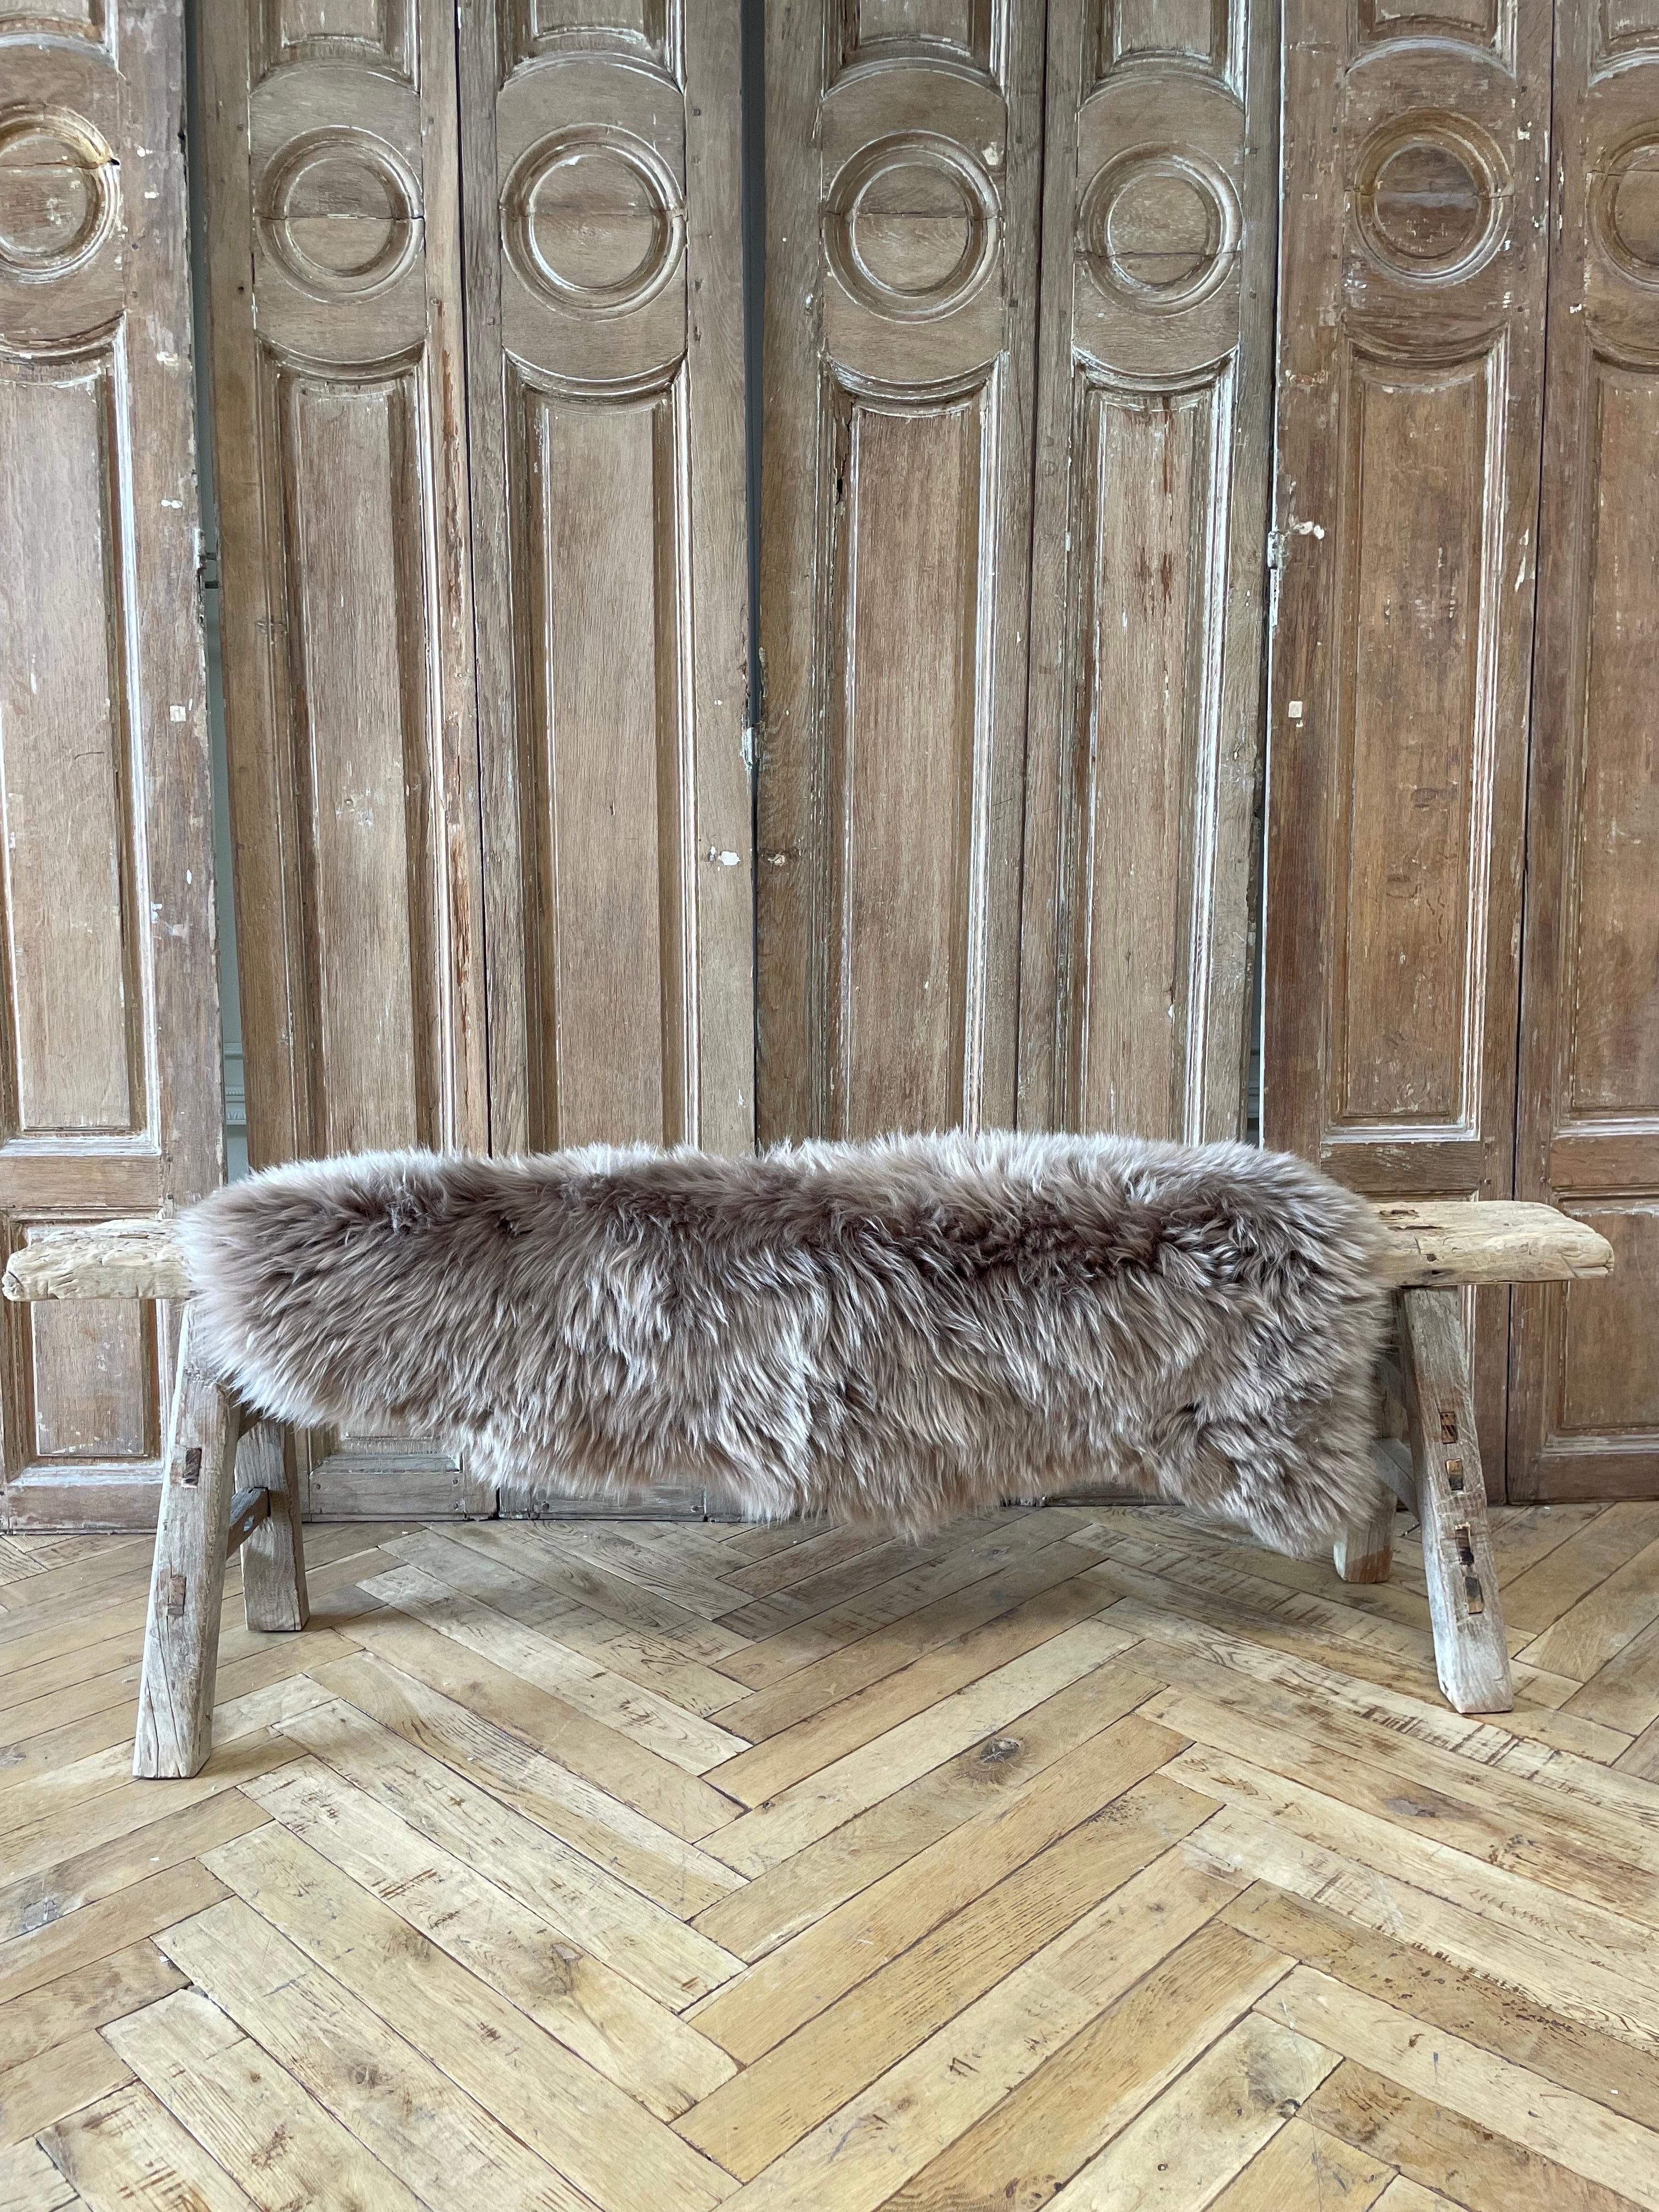 Natural sheep skin 
origin: paris france
Size at widest points : 45” x 31” / shortest width 23”
Center to Center of skin 41” x 26”
A gorgeous dark mocha taupe gray long hair. Perfect for use over a bench, or as a rug.